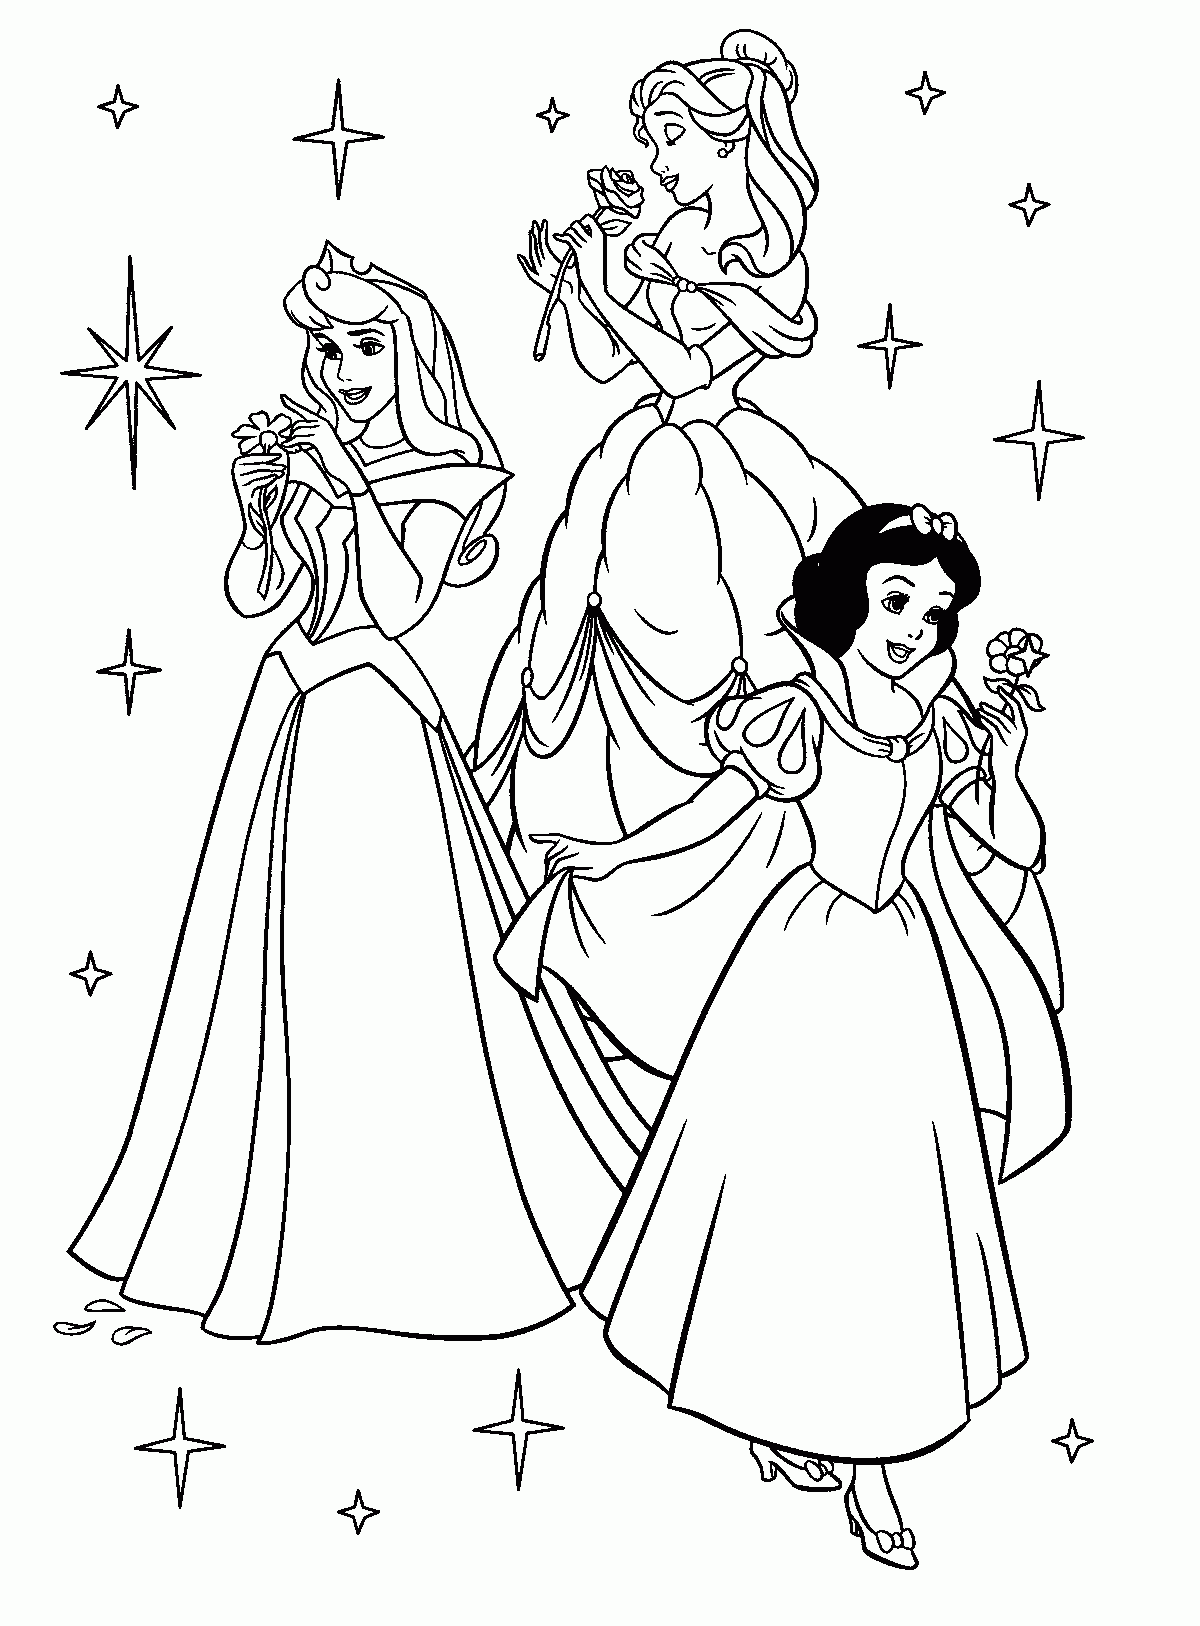 Disney Princess Aurora Coloring Pages | Coloring Pages Kids Collection